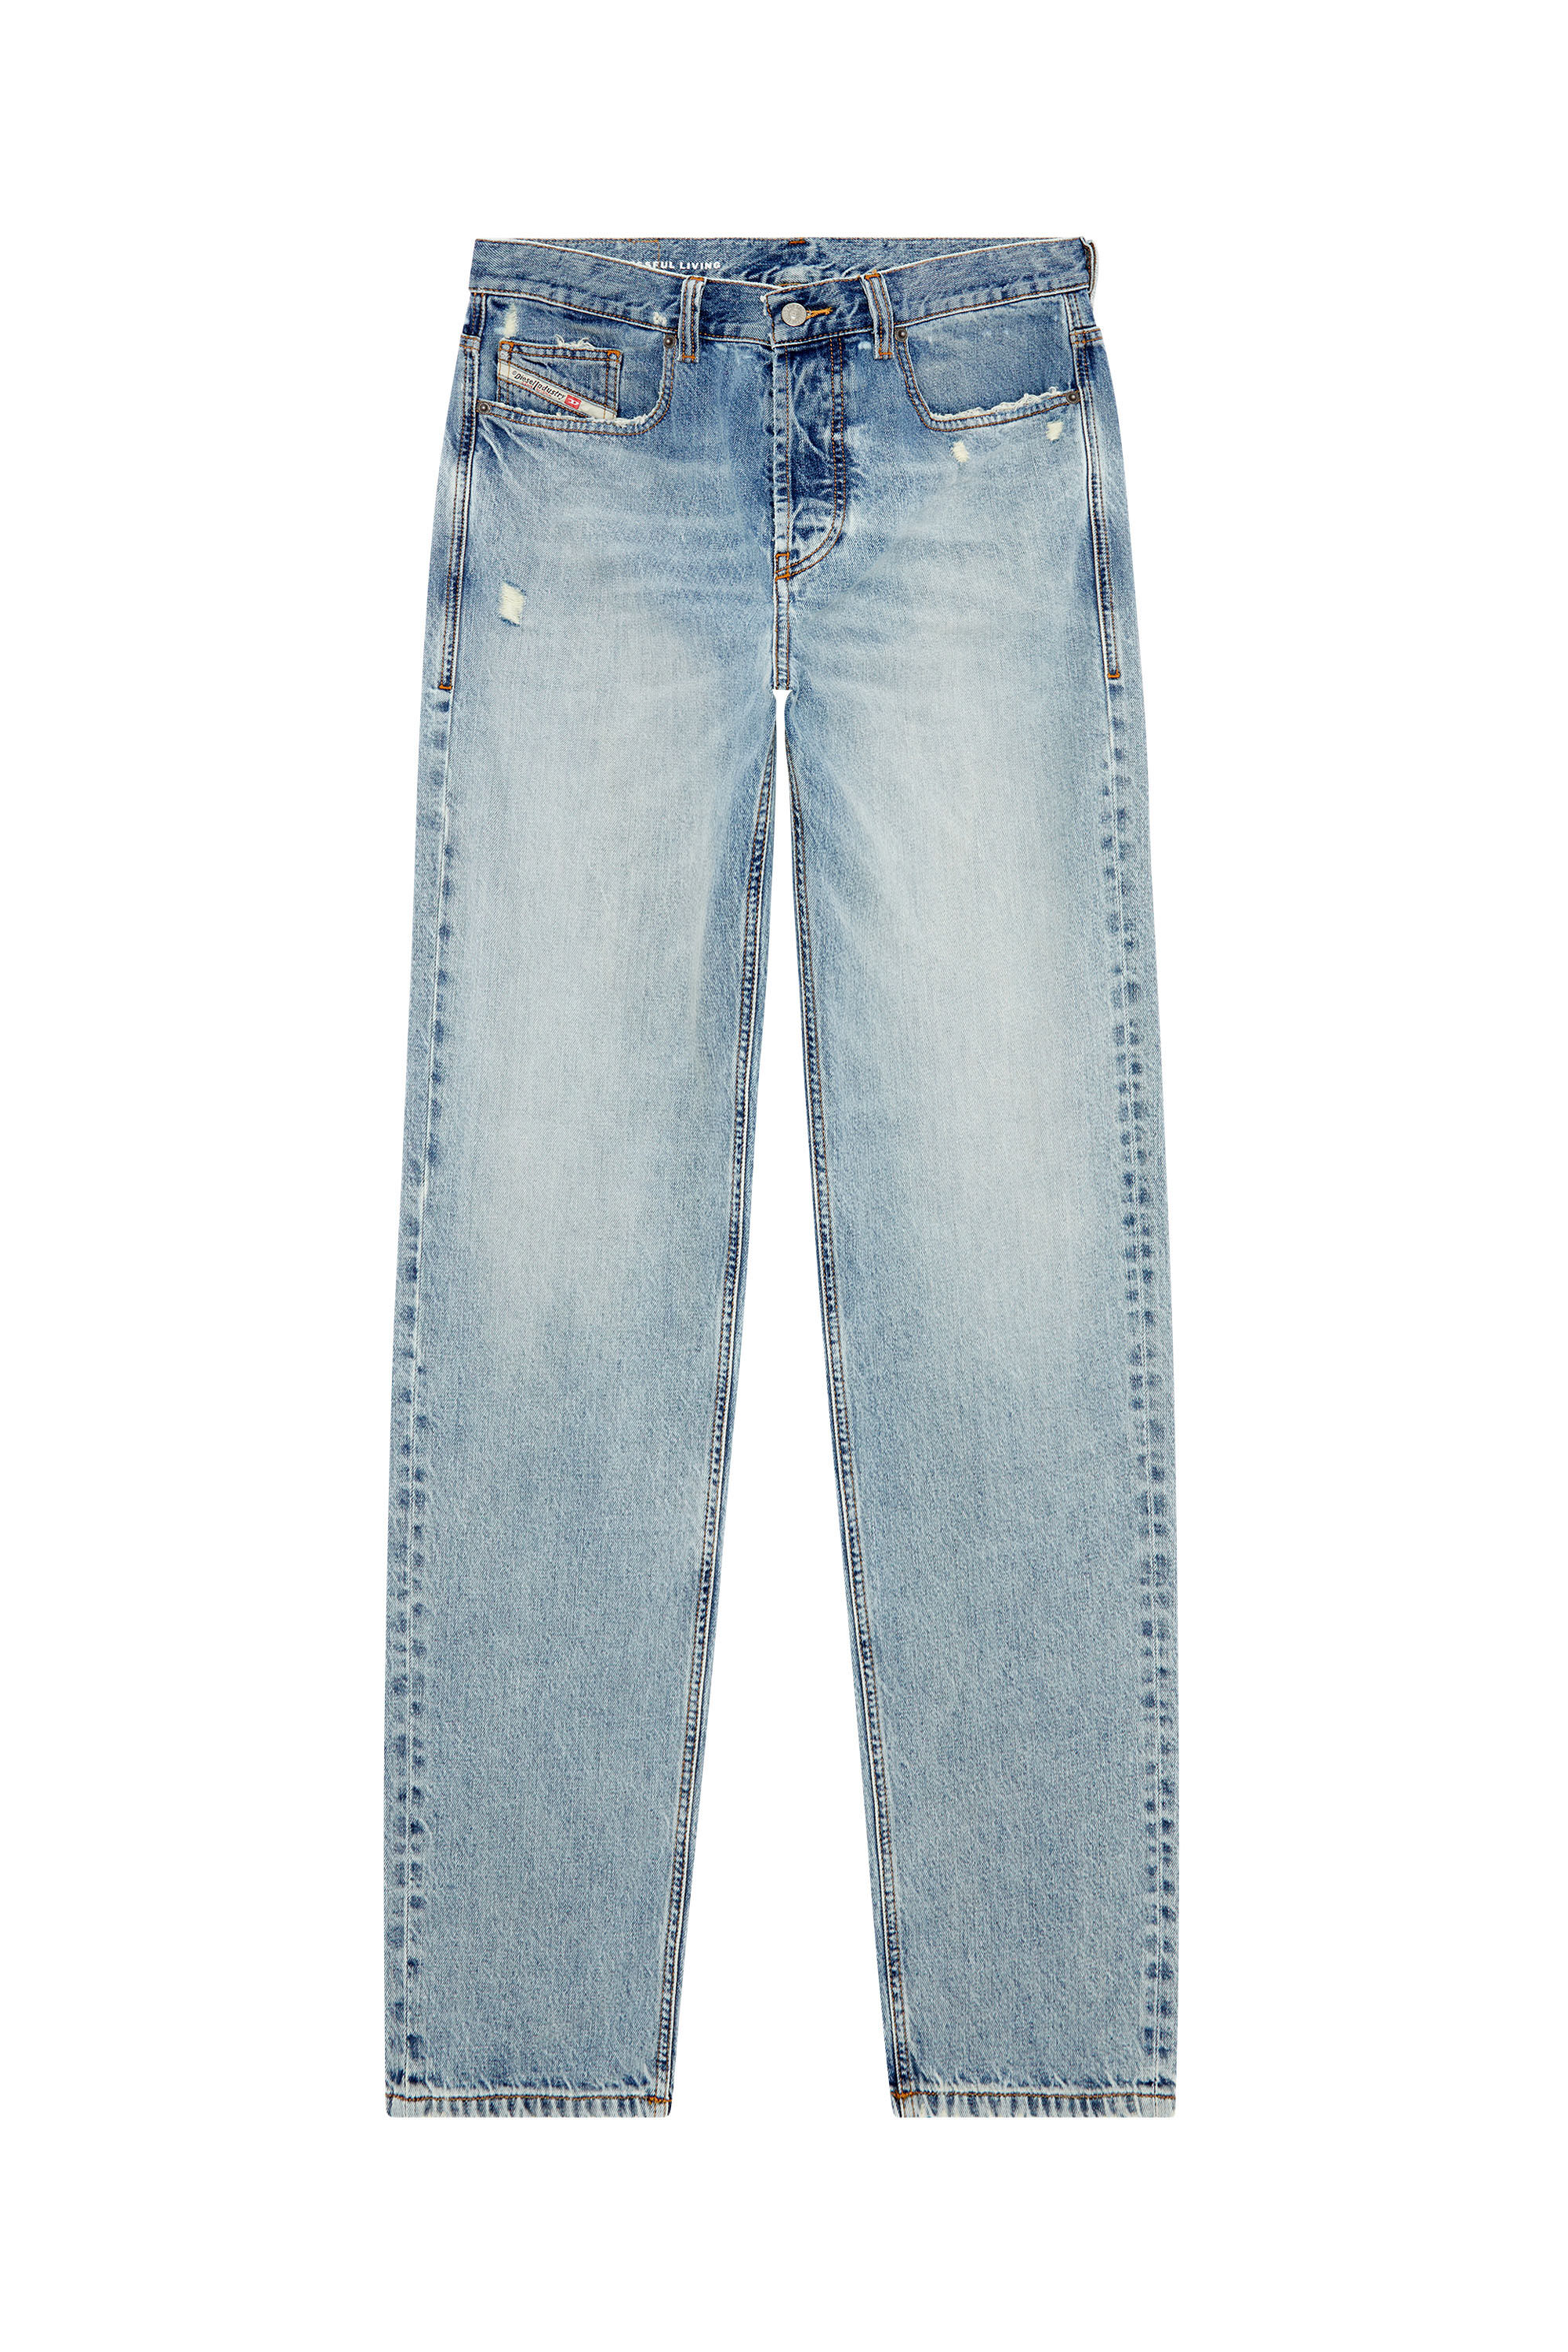 Diesel - Straight Jeans 2010 D-Macs 09H97, Hombre Straight Jeans - 2010 D-Macs in Azul marino - Image 1